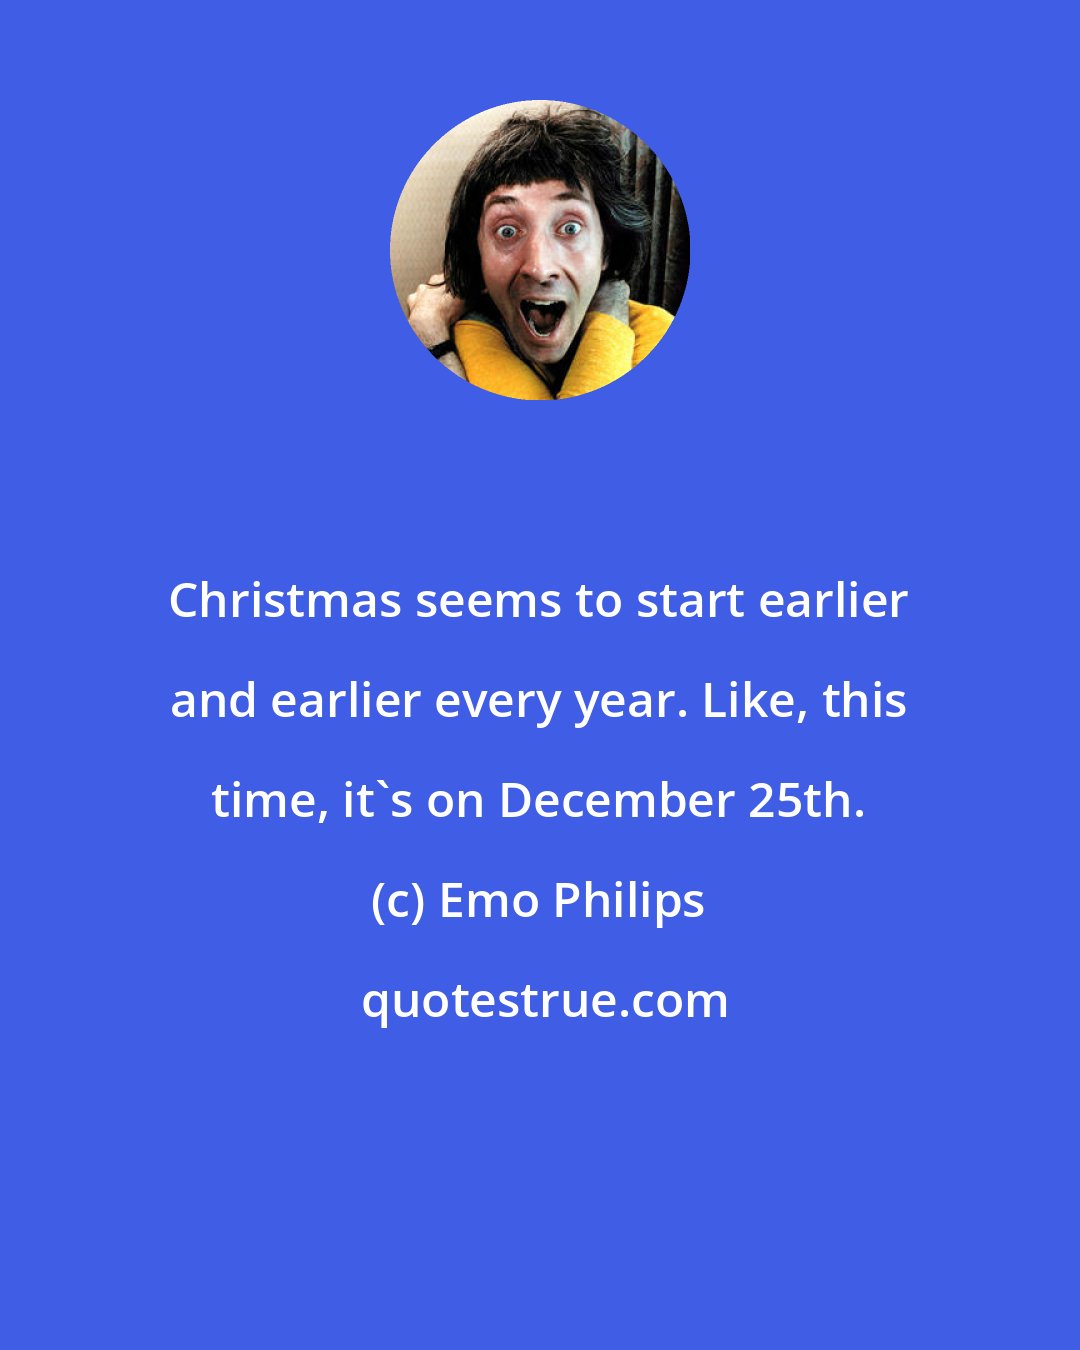 Emo Philips: Christmas seems to start earlier and earlier every year. Like, this time, it's on December 25th.